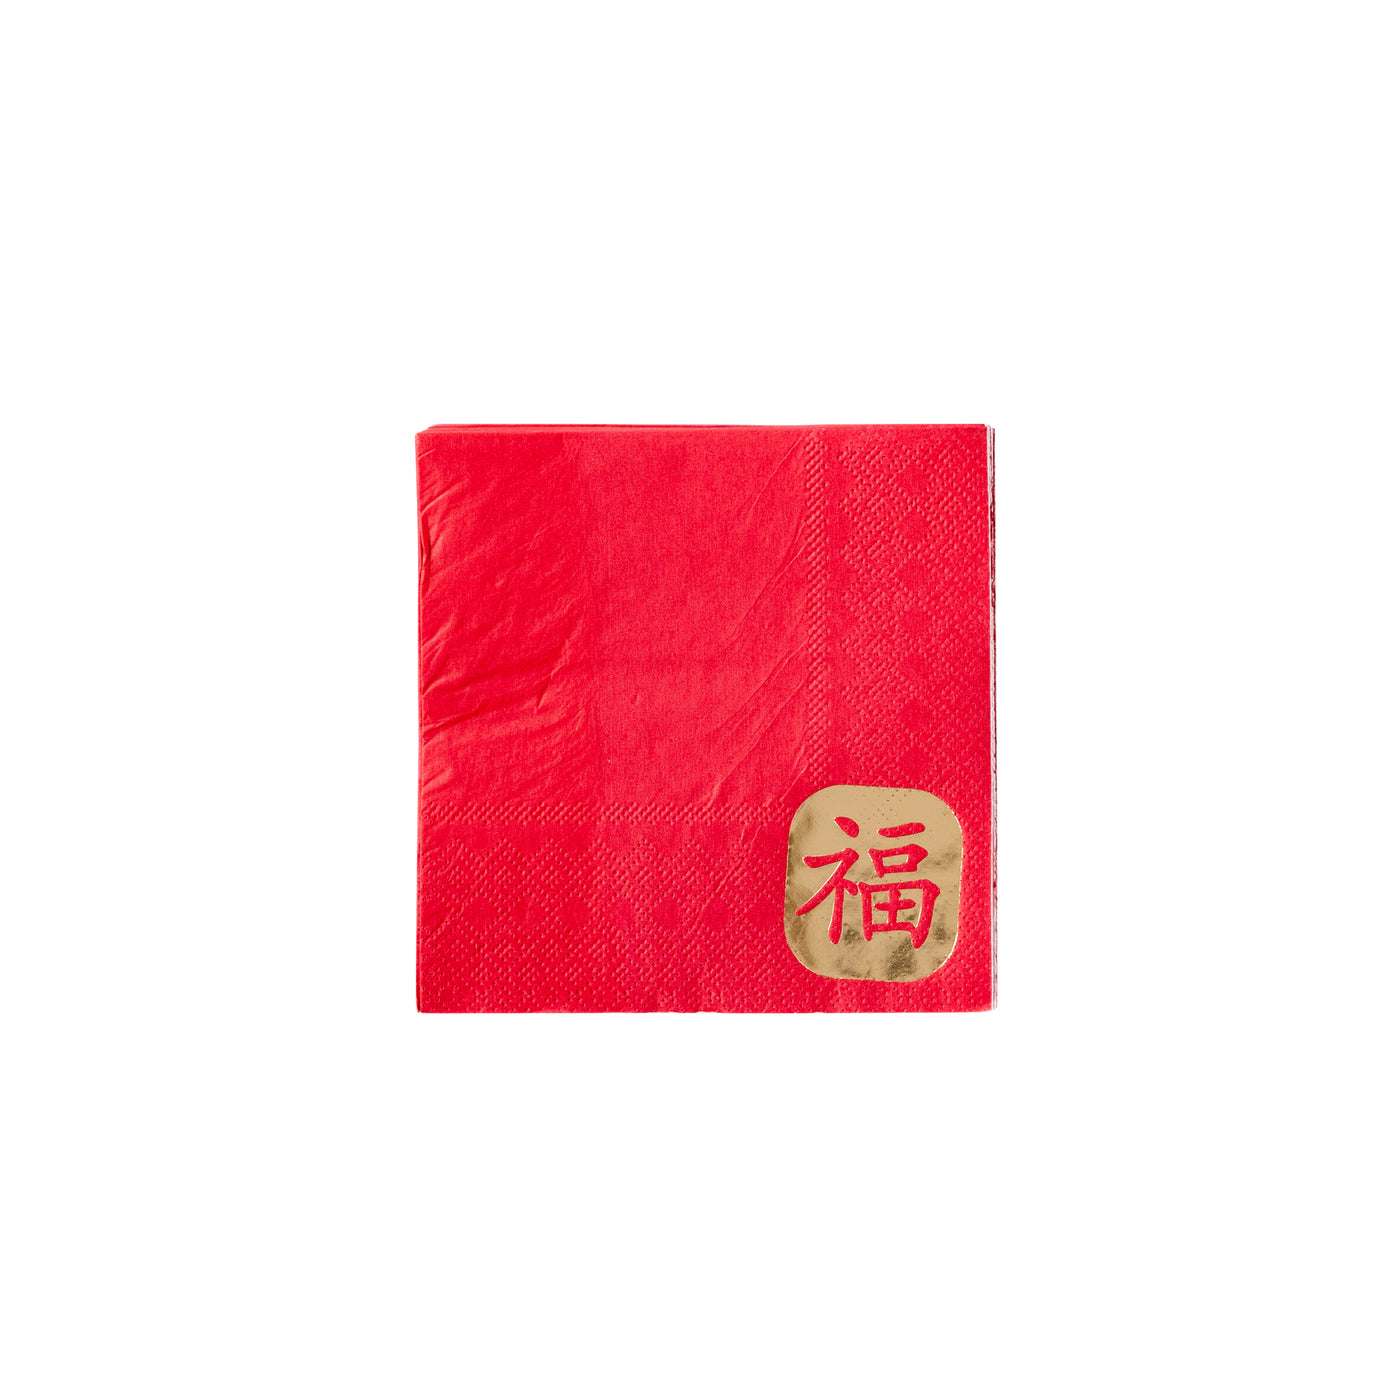 PLNY158 - Lunar New Year Foiled Good Fortune Cocktail Napkin